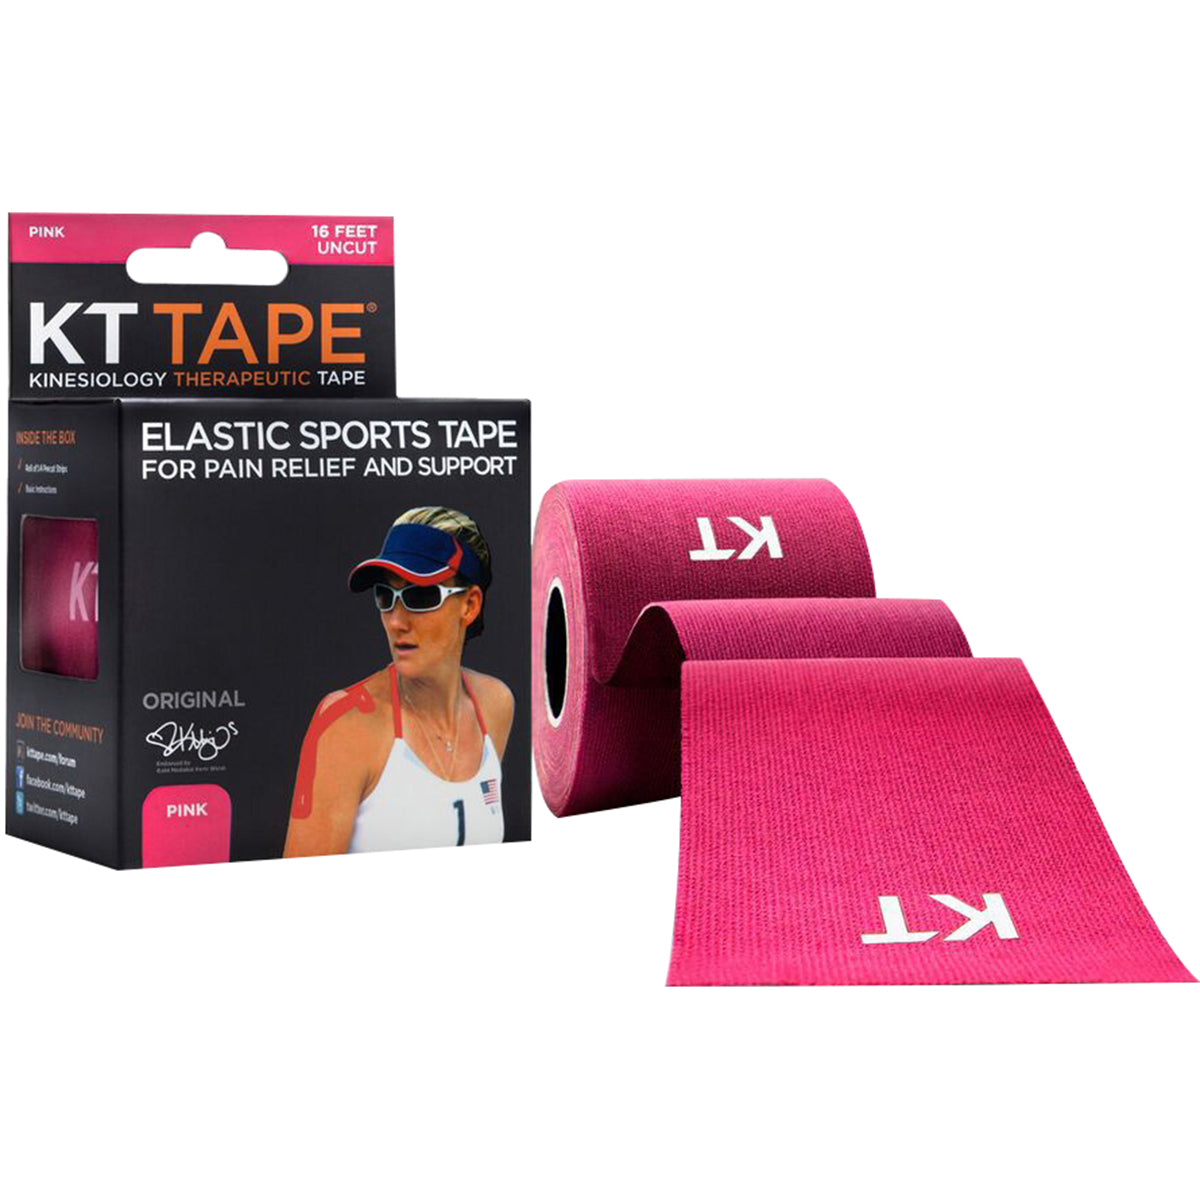 KT Tape Cotton 16 ft Uncut Kinesiology Therapeutic Elastic Sports Roll - Pink KT Tape